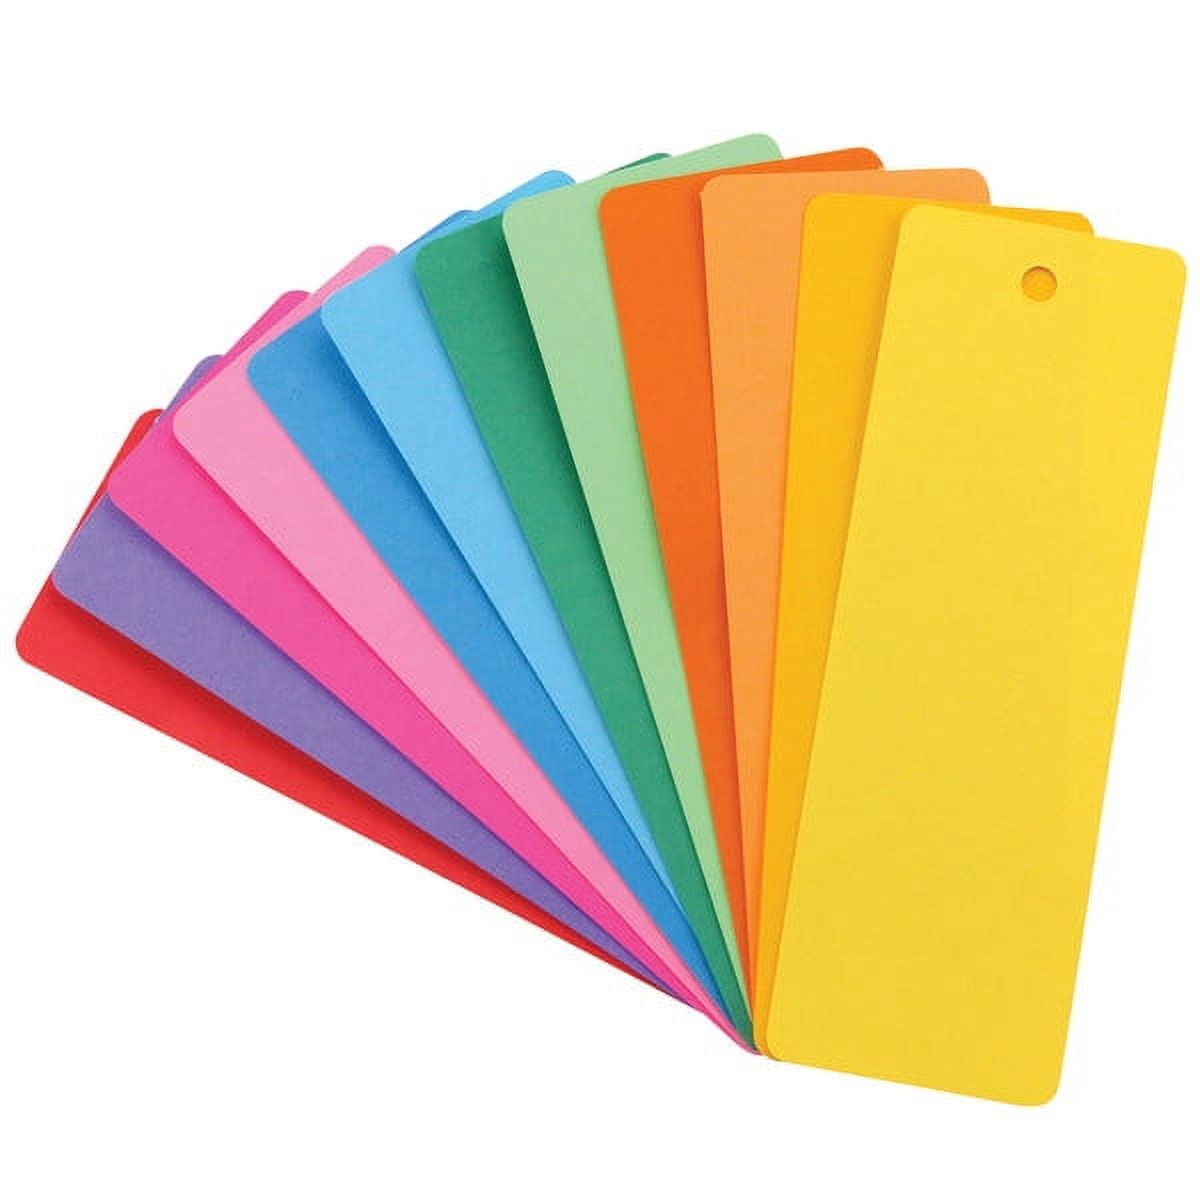 Hygloss Products Small Blank Books – 10 Assorted Colors - 32 Pages - 5.5 x  8.5